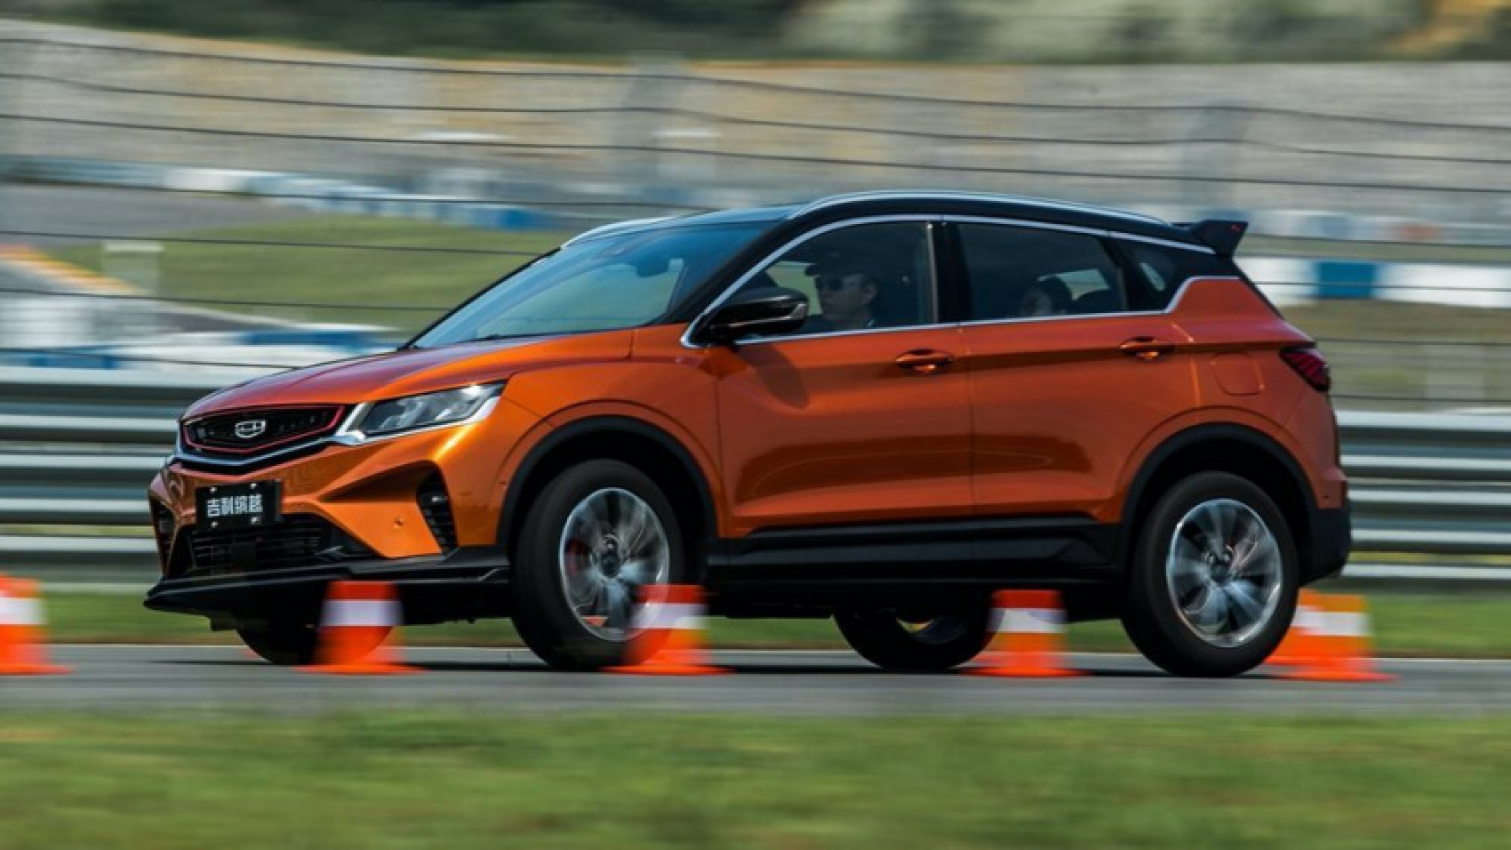 autos, cars, nissan, reviews, compact suv, crossover, edaran tan chong motor, etcm, insights, kicks, nissan kicks, qashqai, nissan kicks could've dominated our compact suv market. is it too late now?